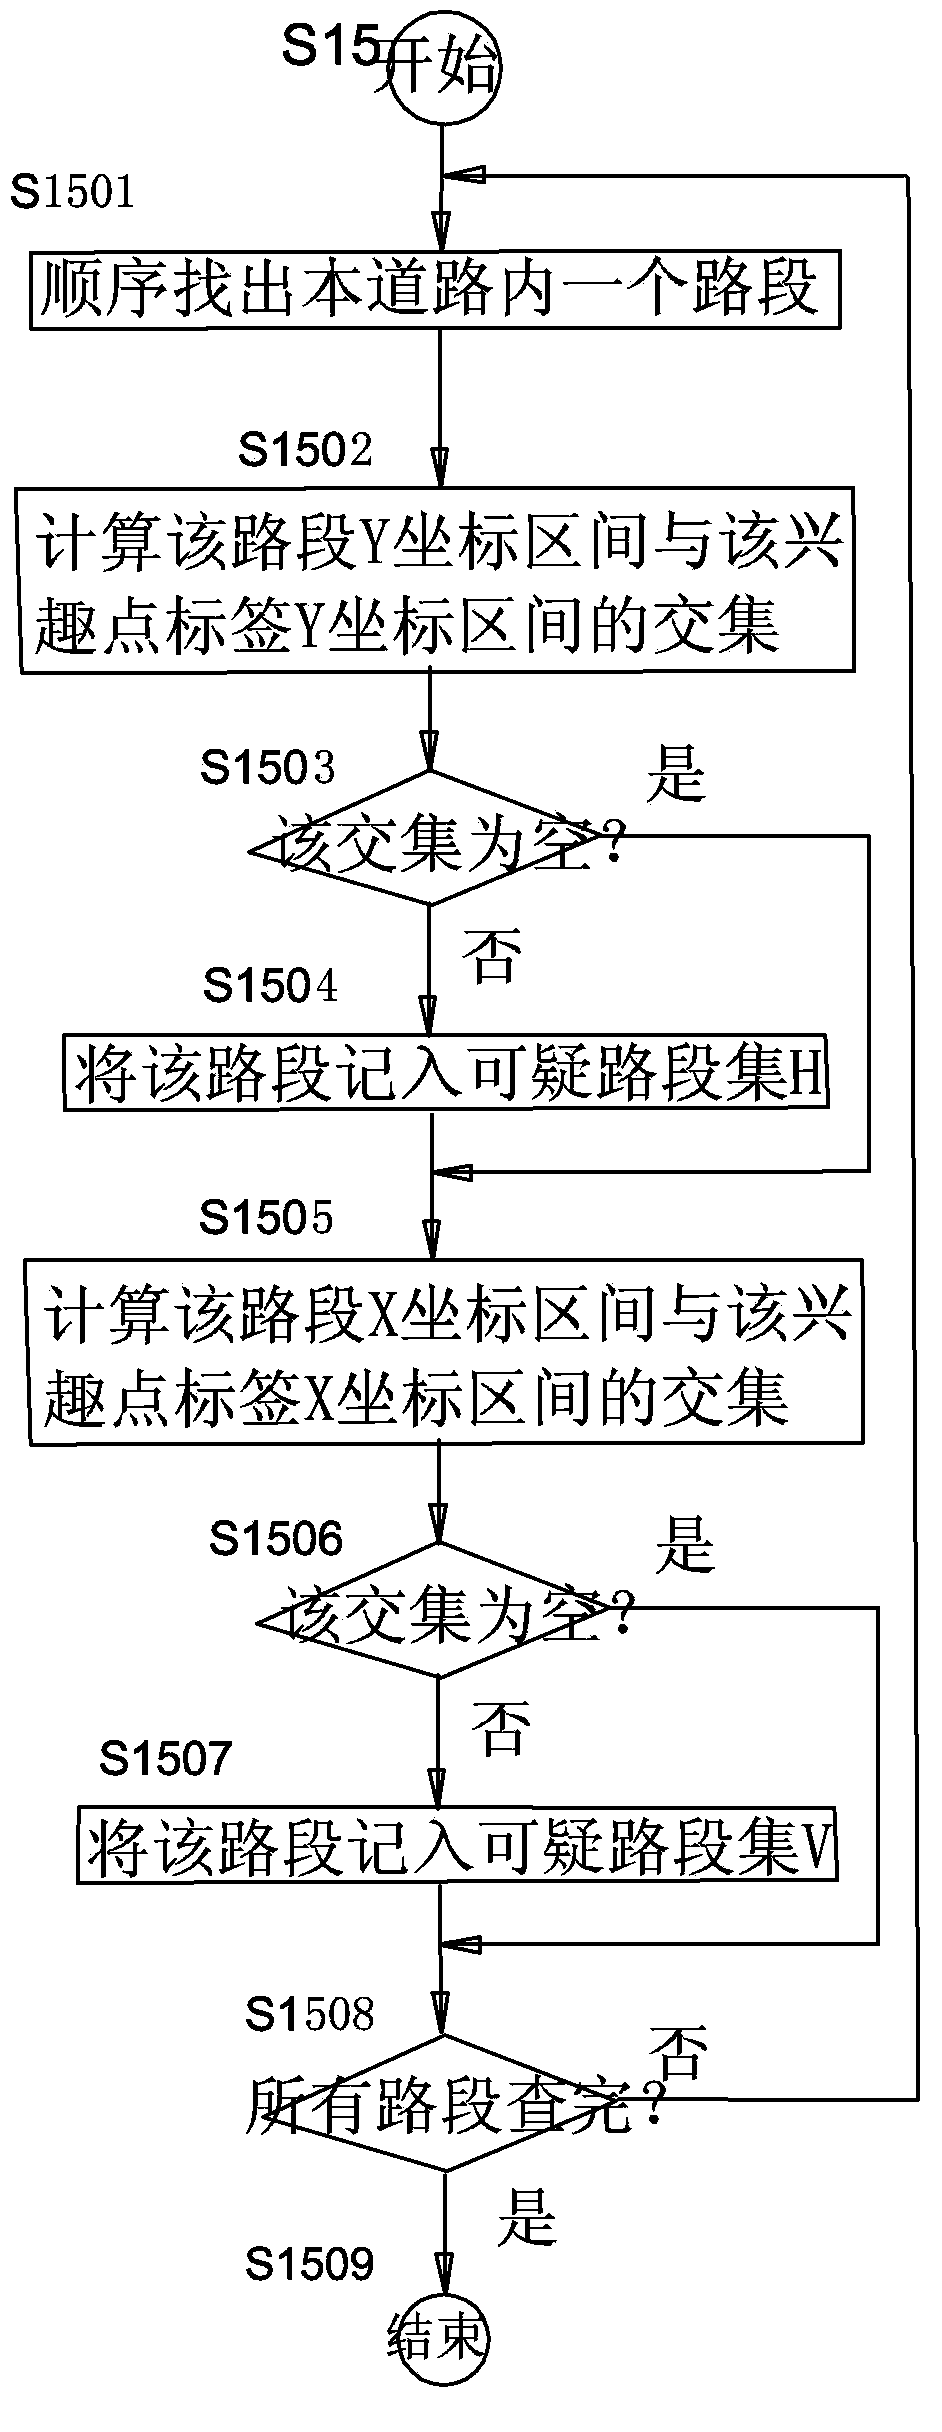 Method for elimination of electronic map interest point label covering of roads